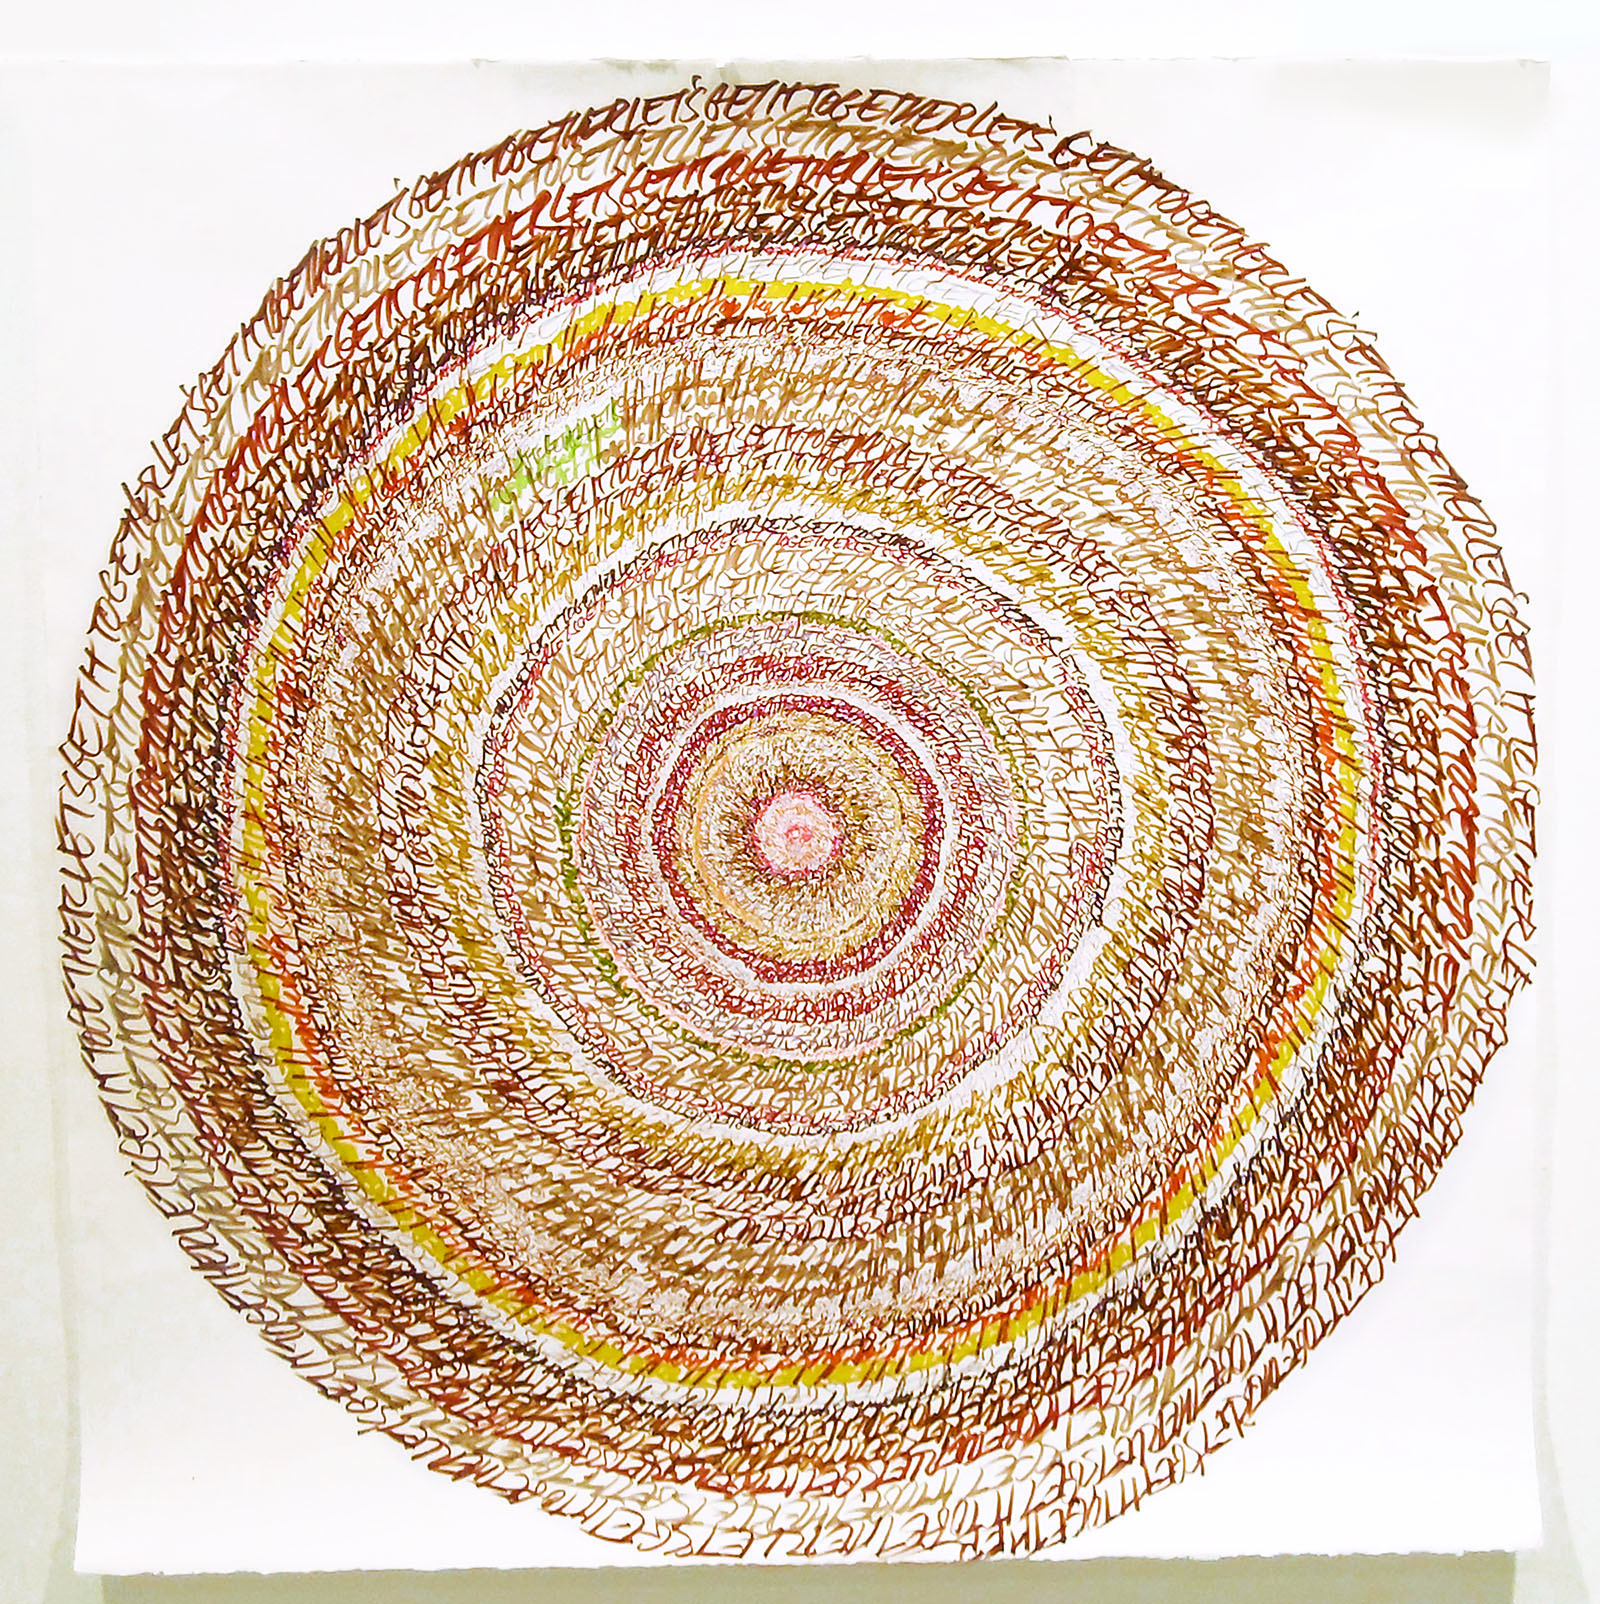 “Energy Spiral—Let’s Get it Together,” 2013, marker and pen on paper, 44in. x 44in.